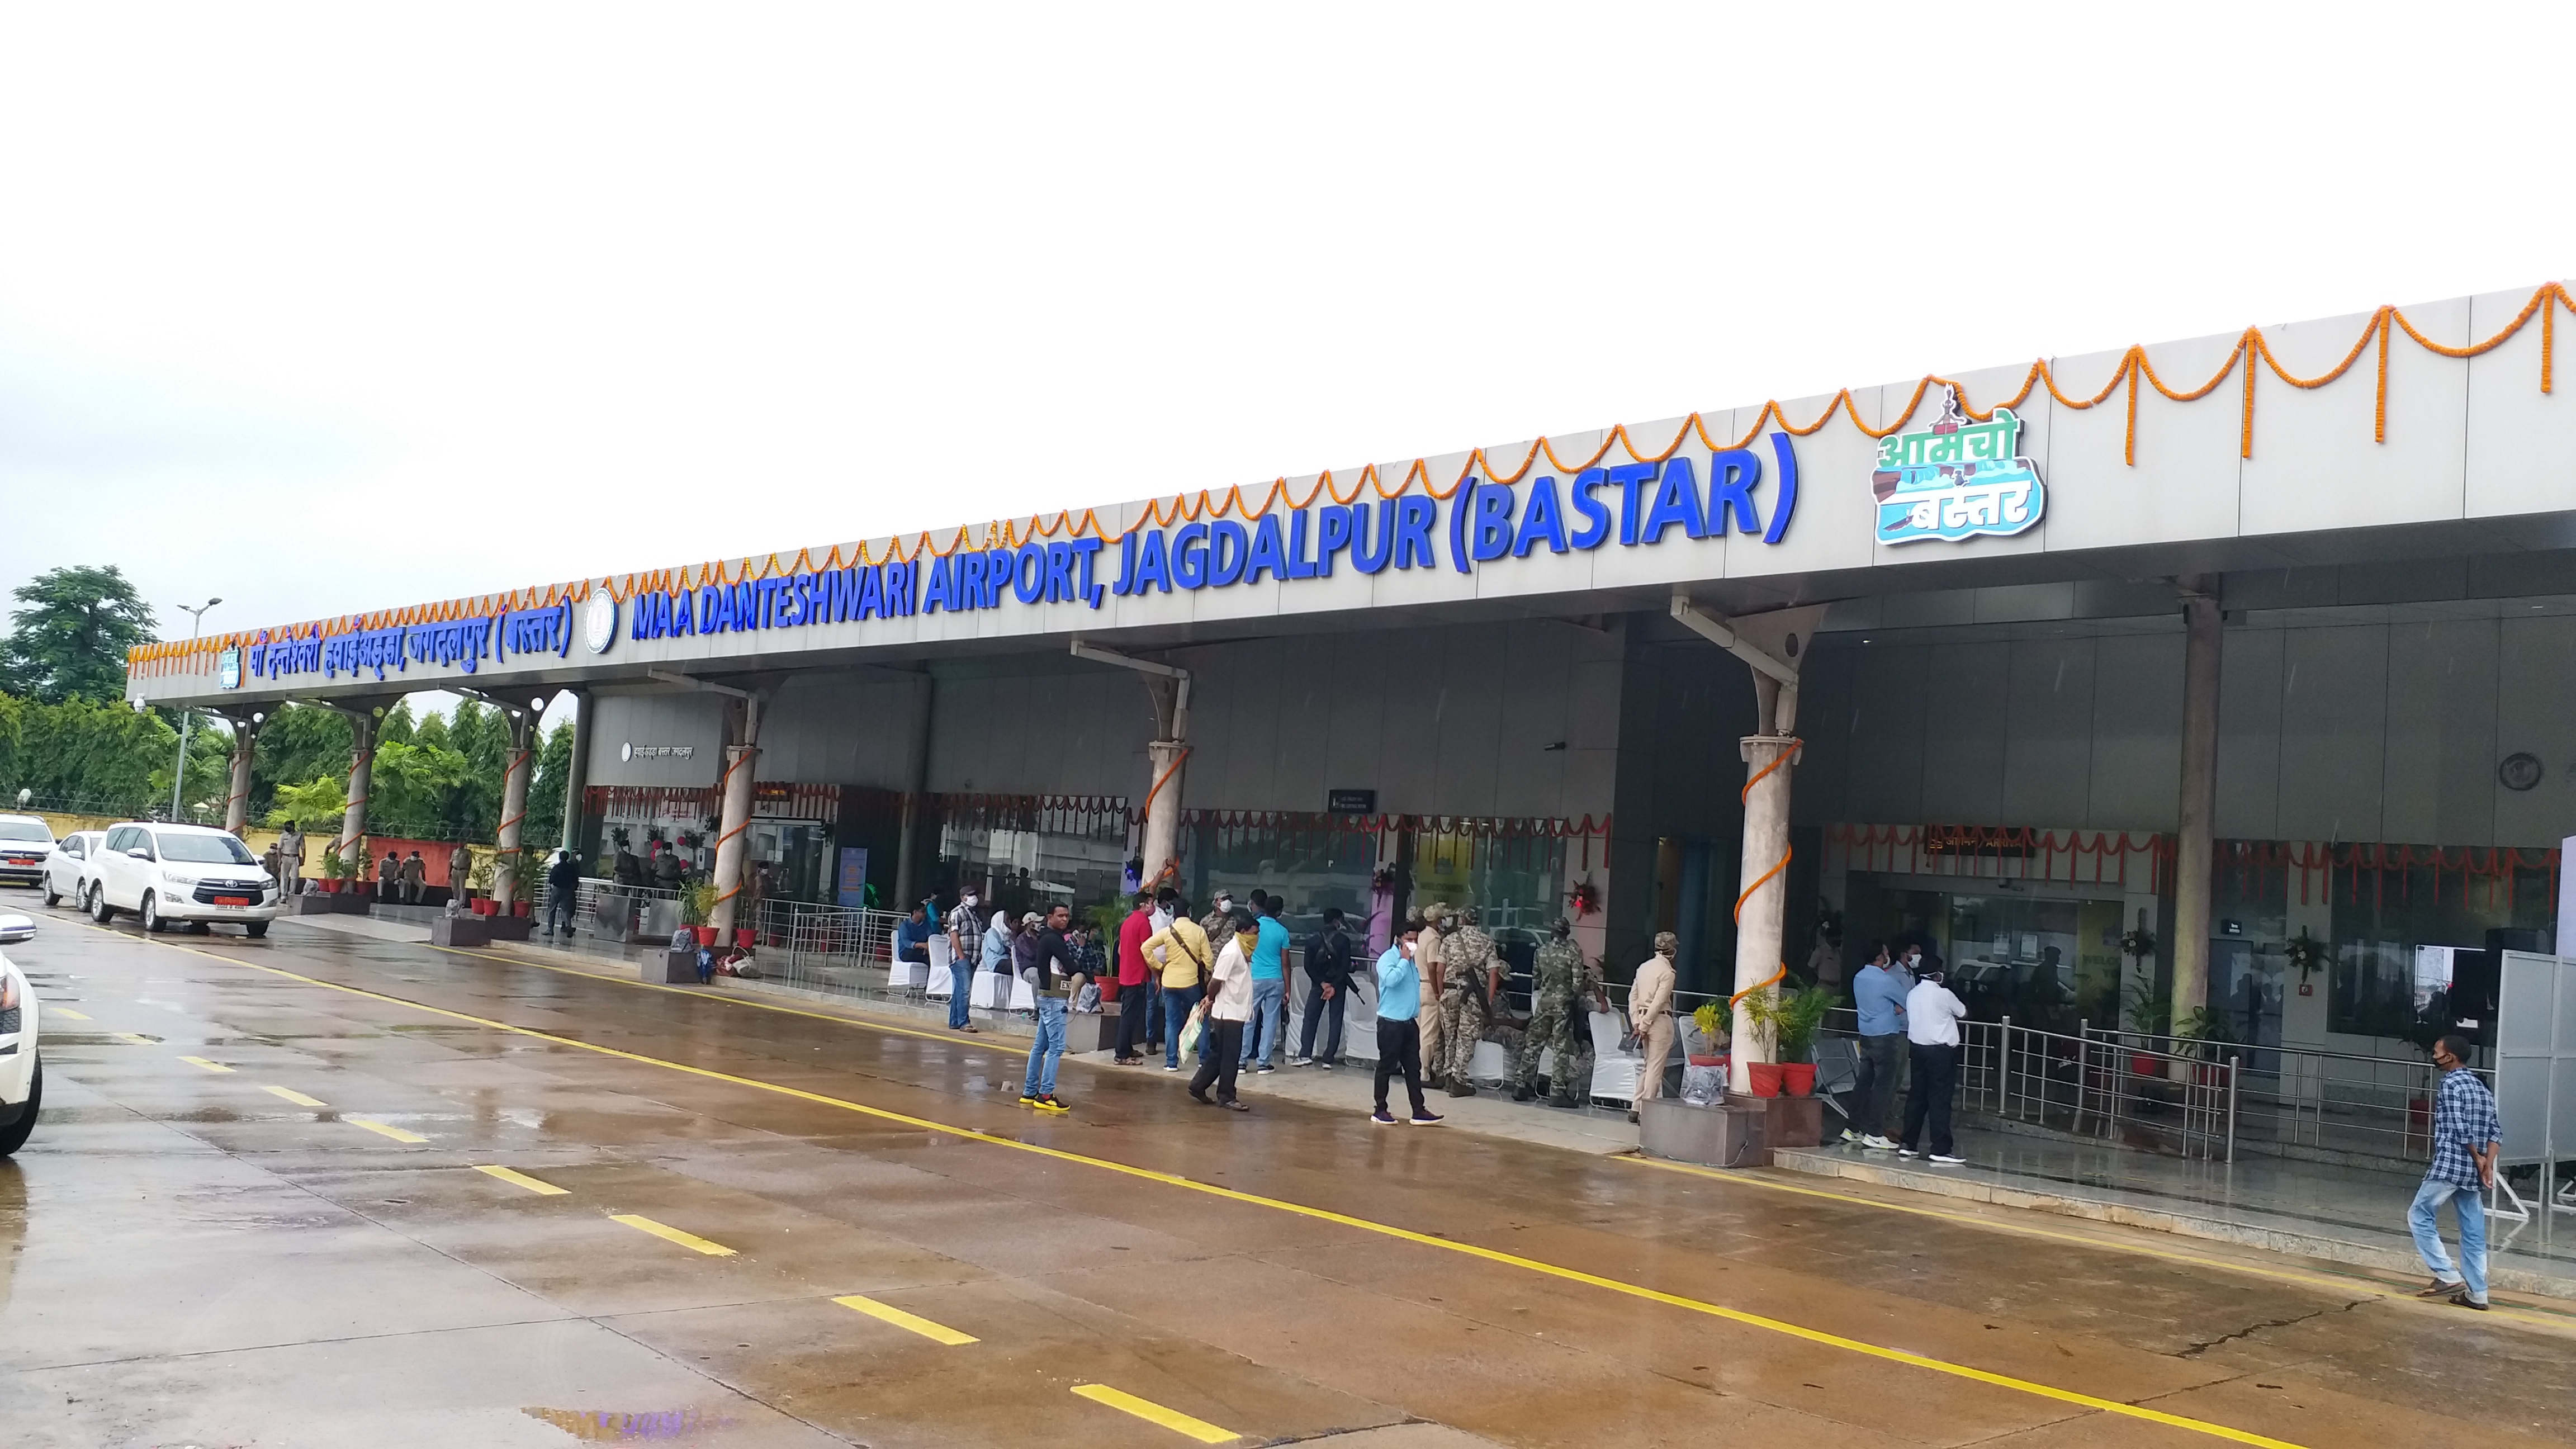 One passenger found corona infected in Jagdalpur airport